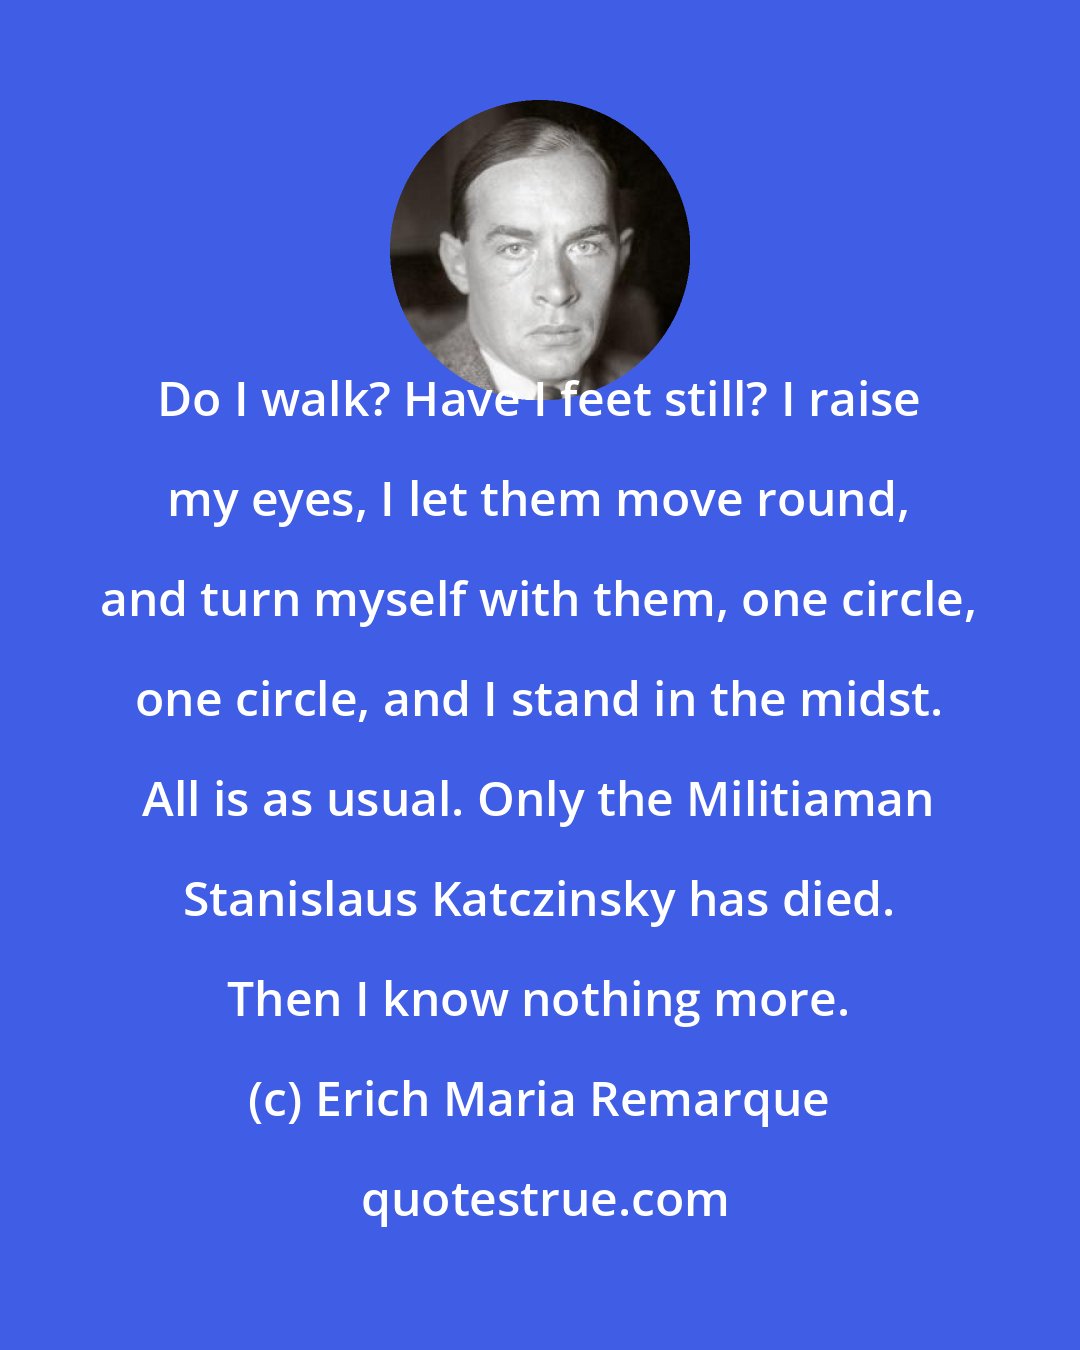 Erich Maria Remarque: Do I walk? Have I feet still? I raise my eyes, I let them move round, and turn myself with them, one circle, one circle, and I stand in the midst. All is as usual. Only the Militiaman Stanislaus Katczinsky has died. Then I know nothing more.